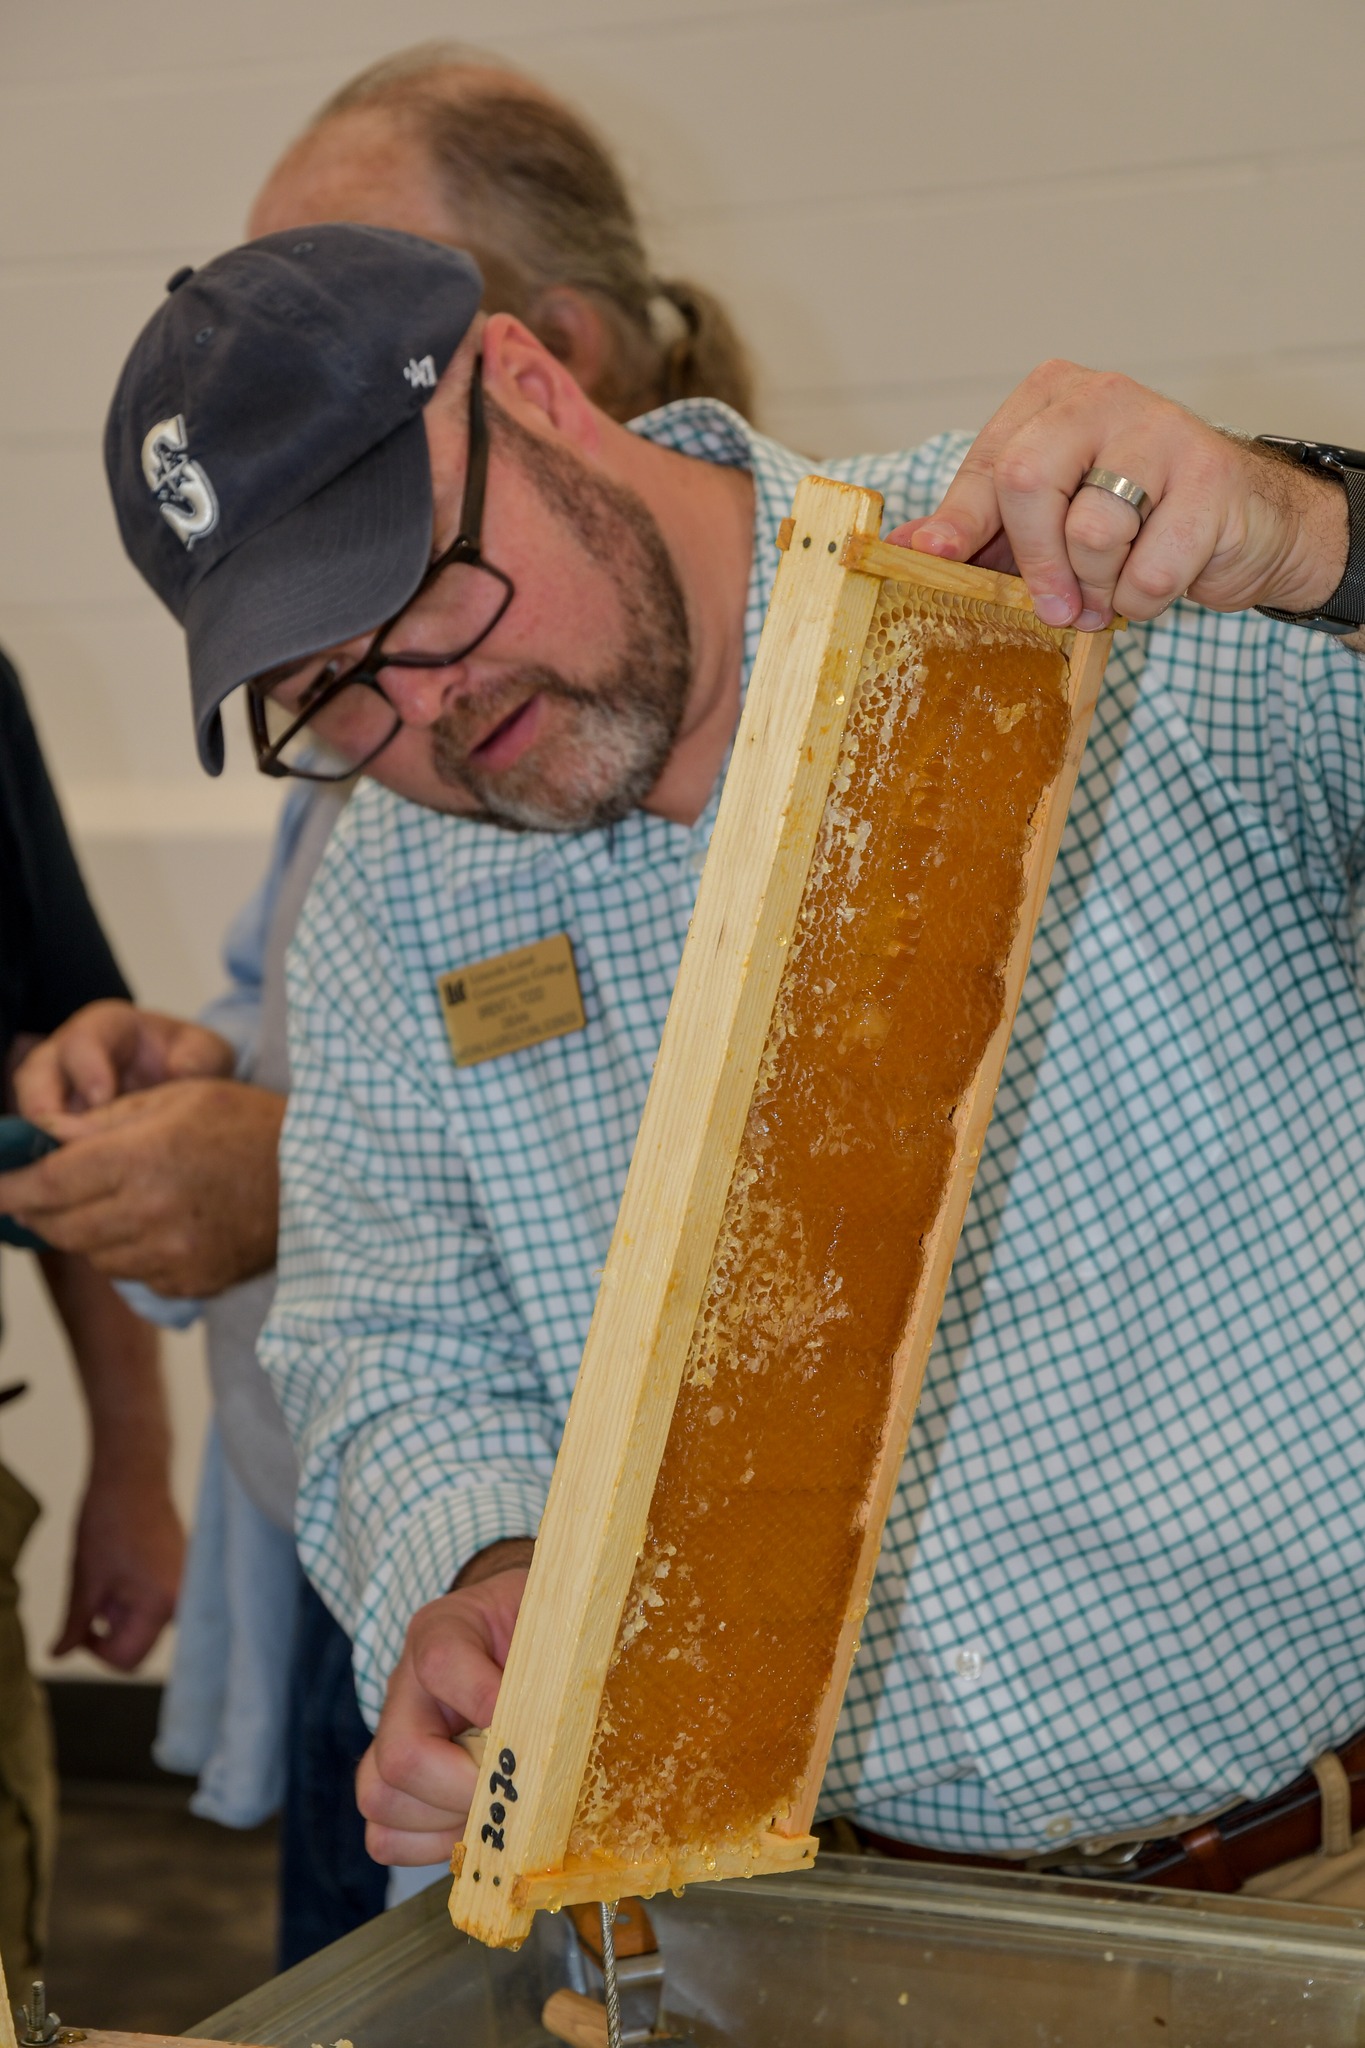 Man in hat inspecting honeycomb